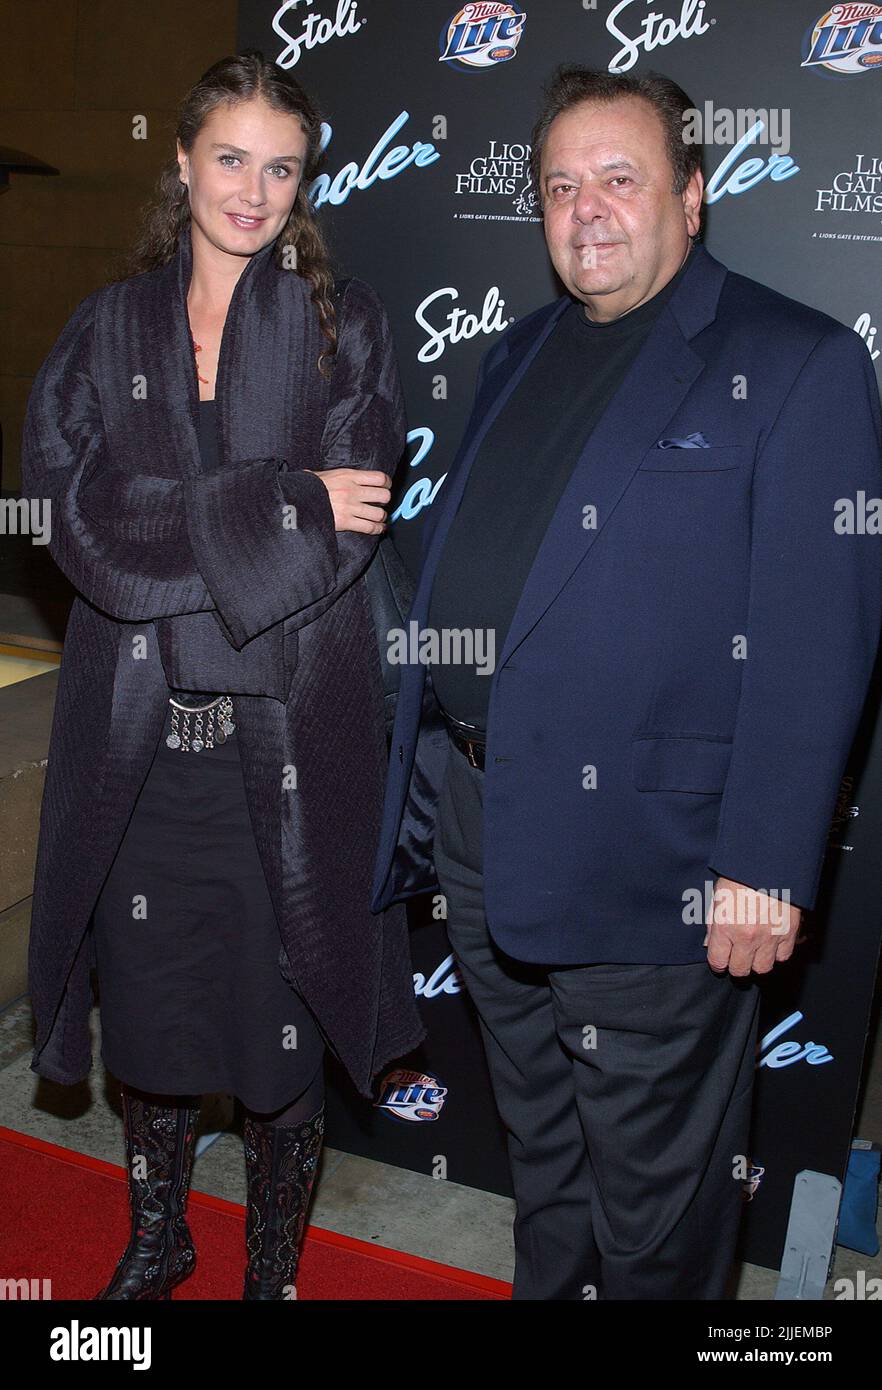 Paul Sorvino and friend arriving at the ' The Cooler Premiere ' at the Egyptian Thaetre in Los Angeles. November 24, 2003. - SorvinoPaul friend60.JPGSorvinoPaul friend60 Event in Hollywood Life - California, Red Carpet Event, USA, Film Industry, Celebrities, Photography, Bestof, Arts Culture and Entertainment, Topix Celebrities fashion, Best of, Hollywood Life, Event in Hollywood Life - California, Red Carpet and backstage, Music celebrities, Musician, Music Group, Topix, Bestof, Arts Culture and Entertainment, Photography, People from the cast, TV show and cast inquiry Stock Photo